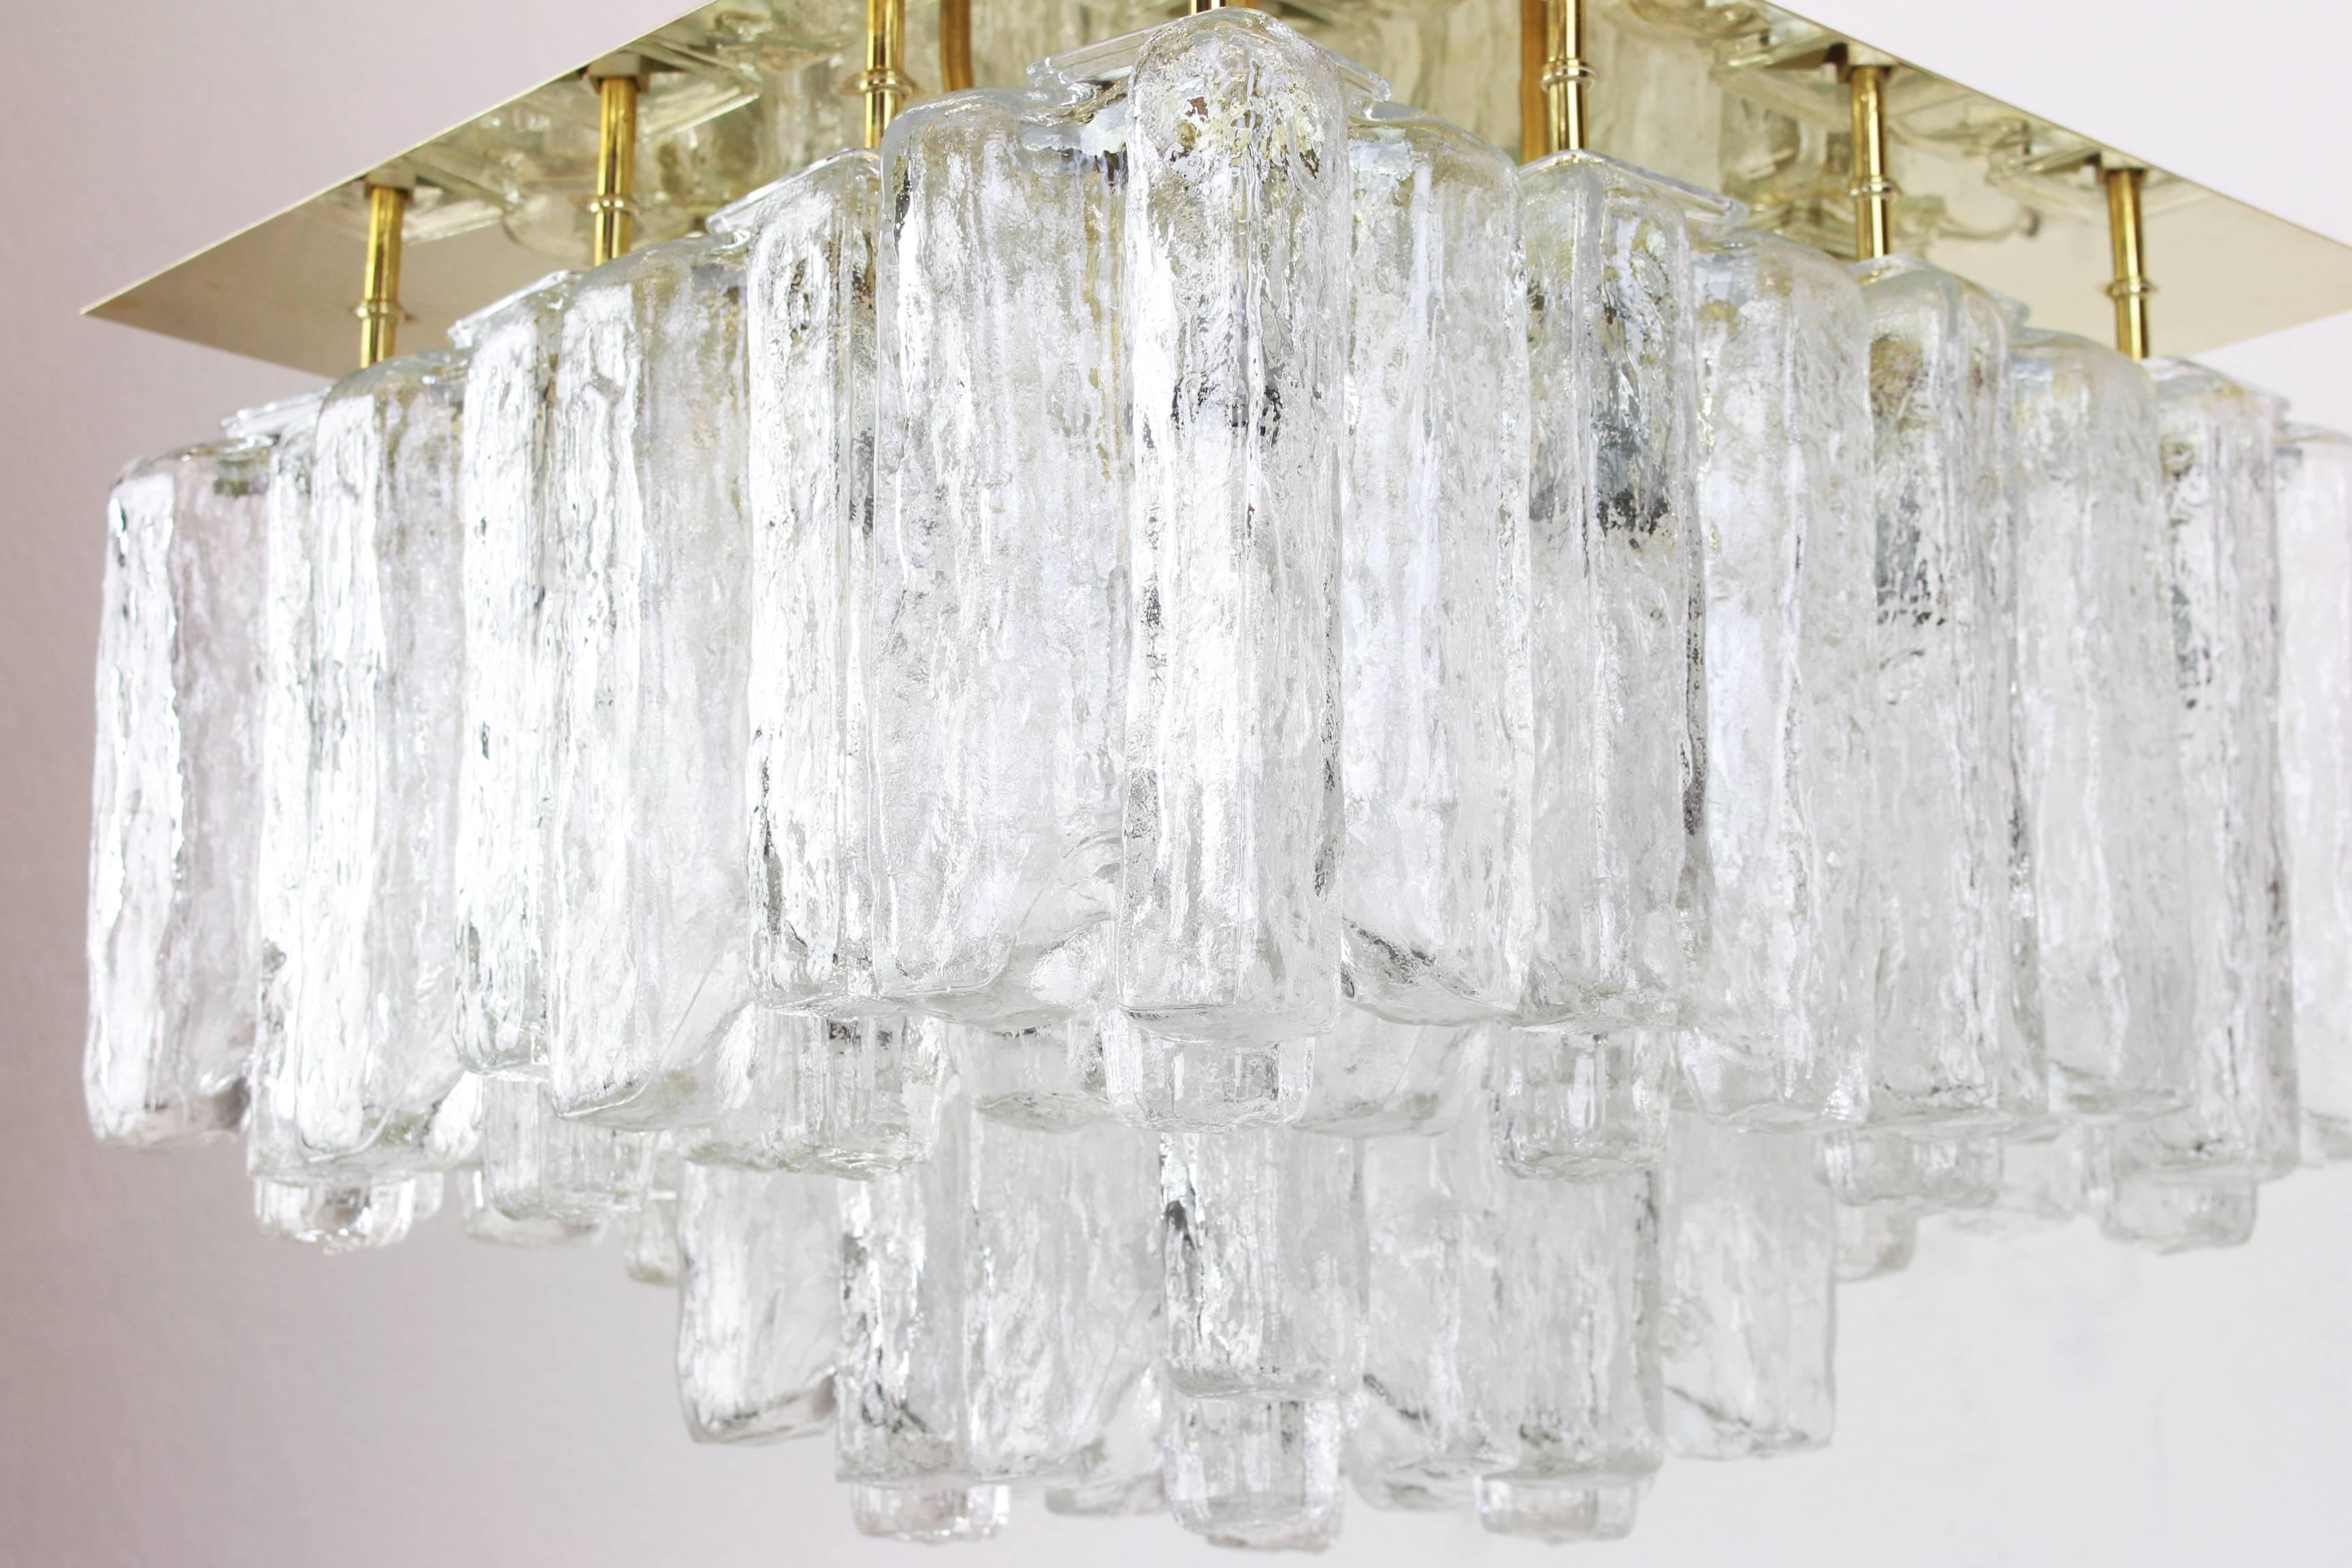 A stunning huge flush mount by Kalmar, Austria, manufactured in 1960s.
The flush mount is composed of 16 thick textured ice glass elements (Granadas) attached to a gold-brass frame.
Dimensions
H 14.18 in. x W 19.69 in. x D 19.69 in.
H 36 cm x W 50